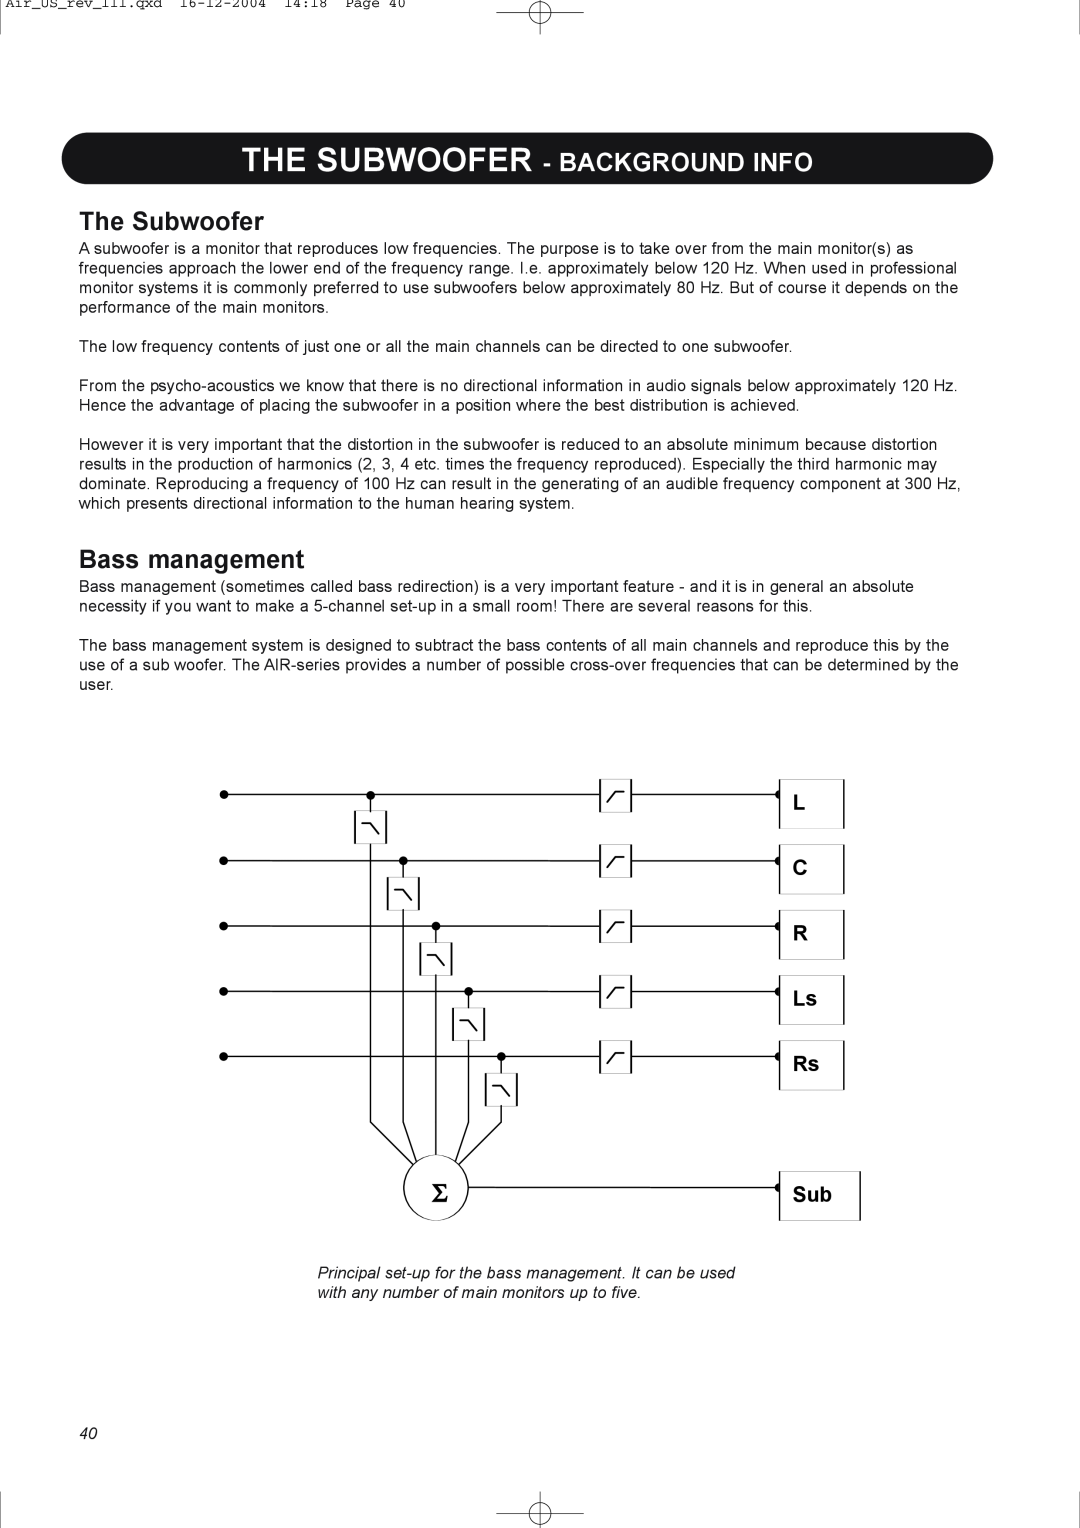 Dynaudio pmn manual The Subwoofer - Background Info, Bass management, L C R Ls Rs Σ Sub 